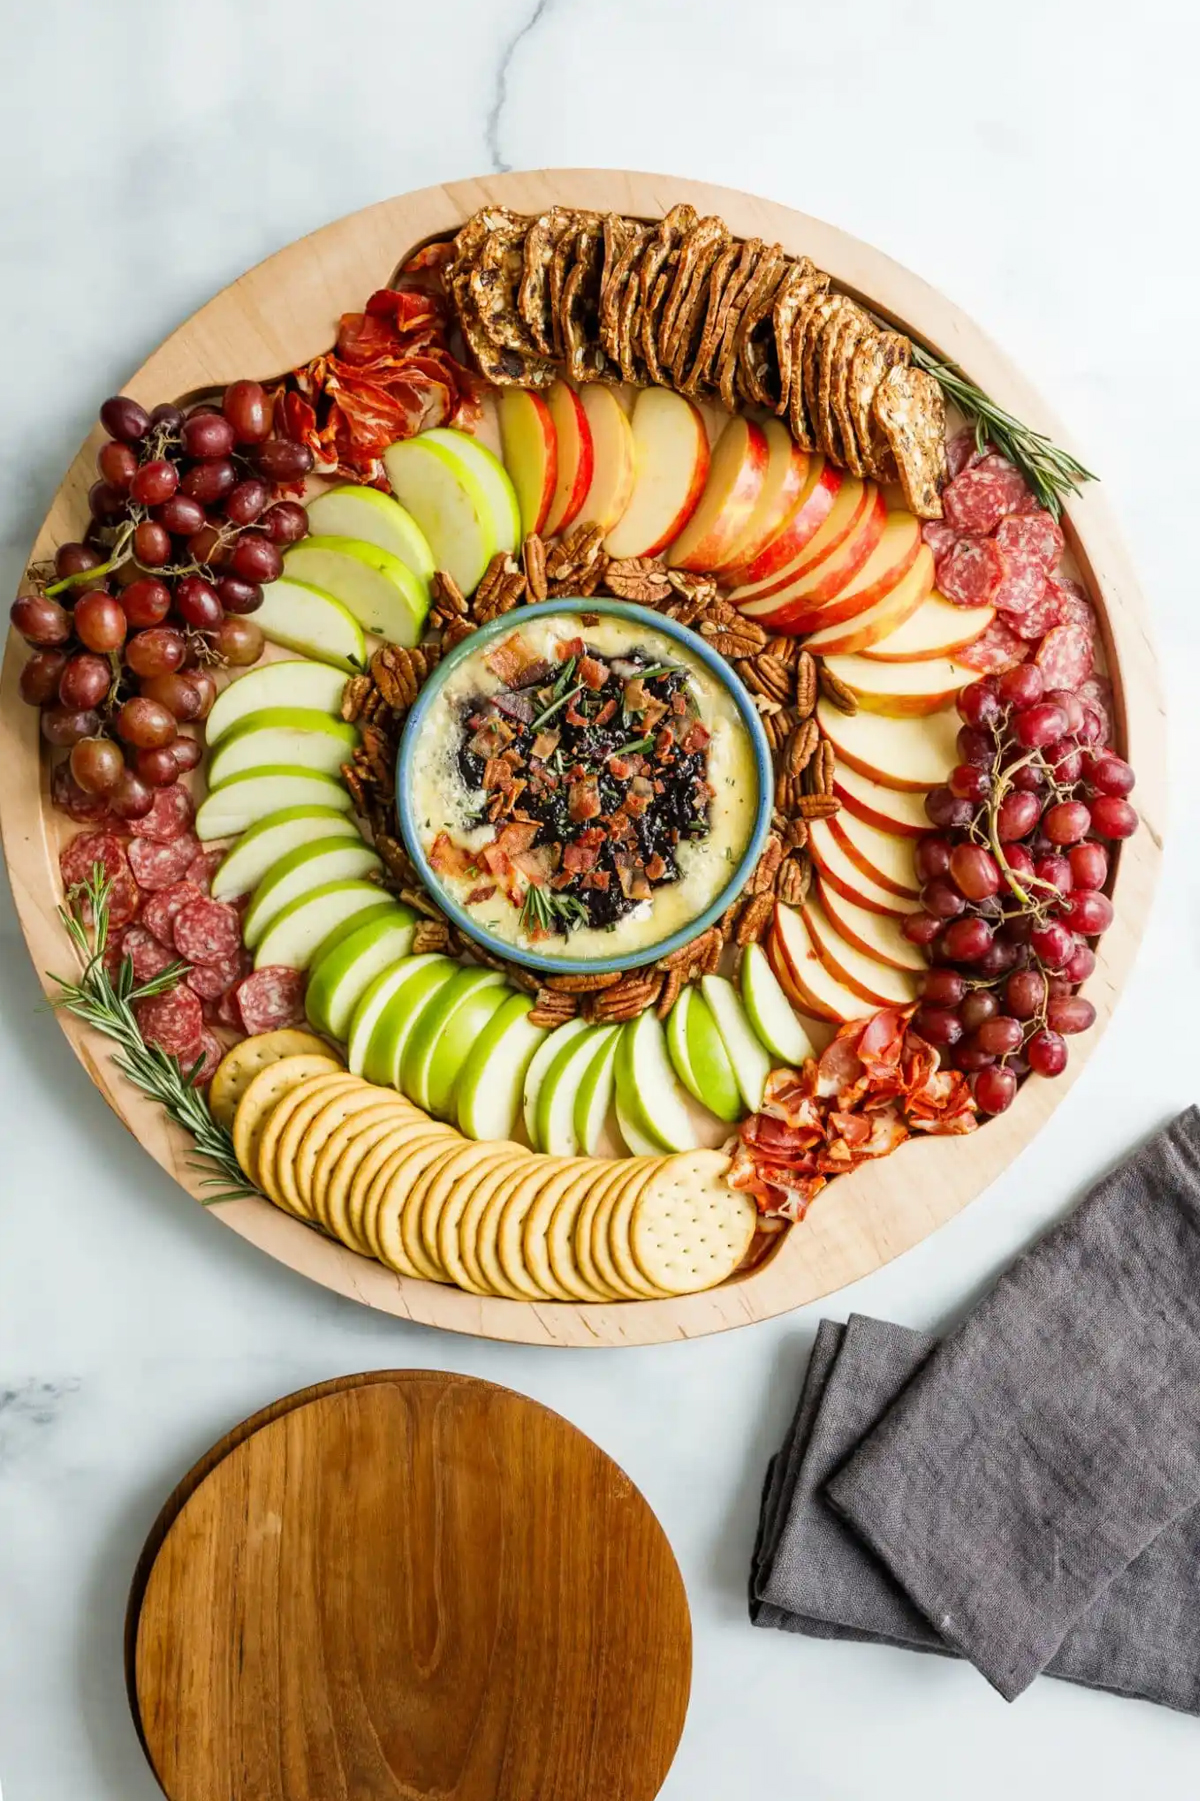 The Reluctant Entertainer has included a wheel of brie, meats, crackers, apples, and nuts on their brie board.